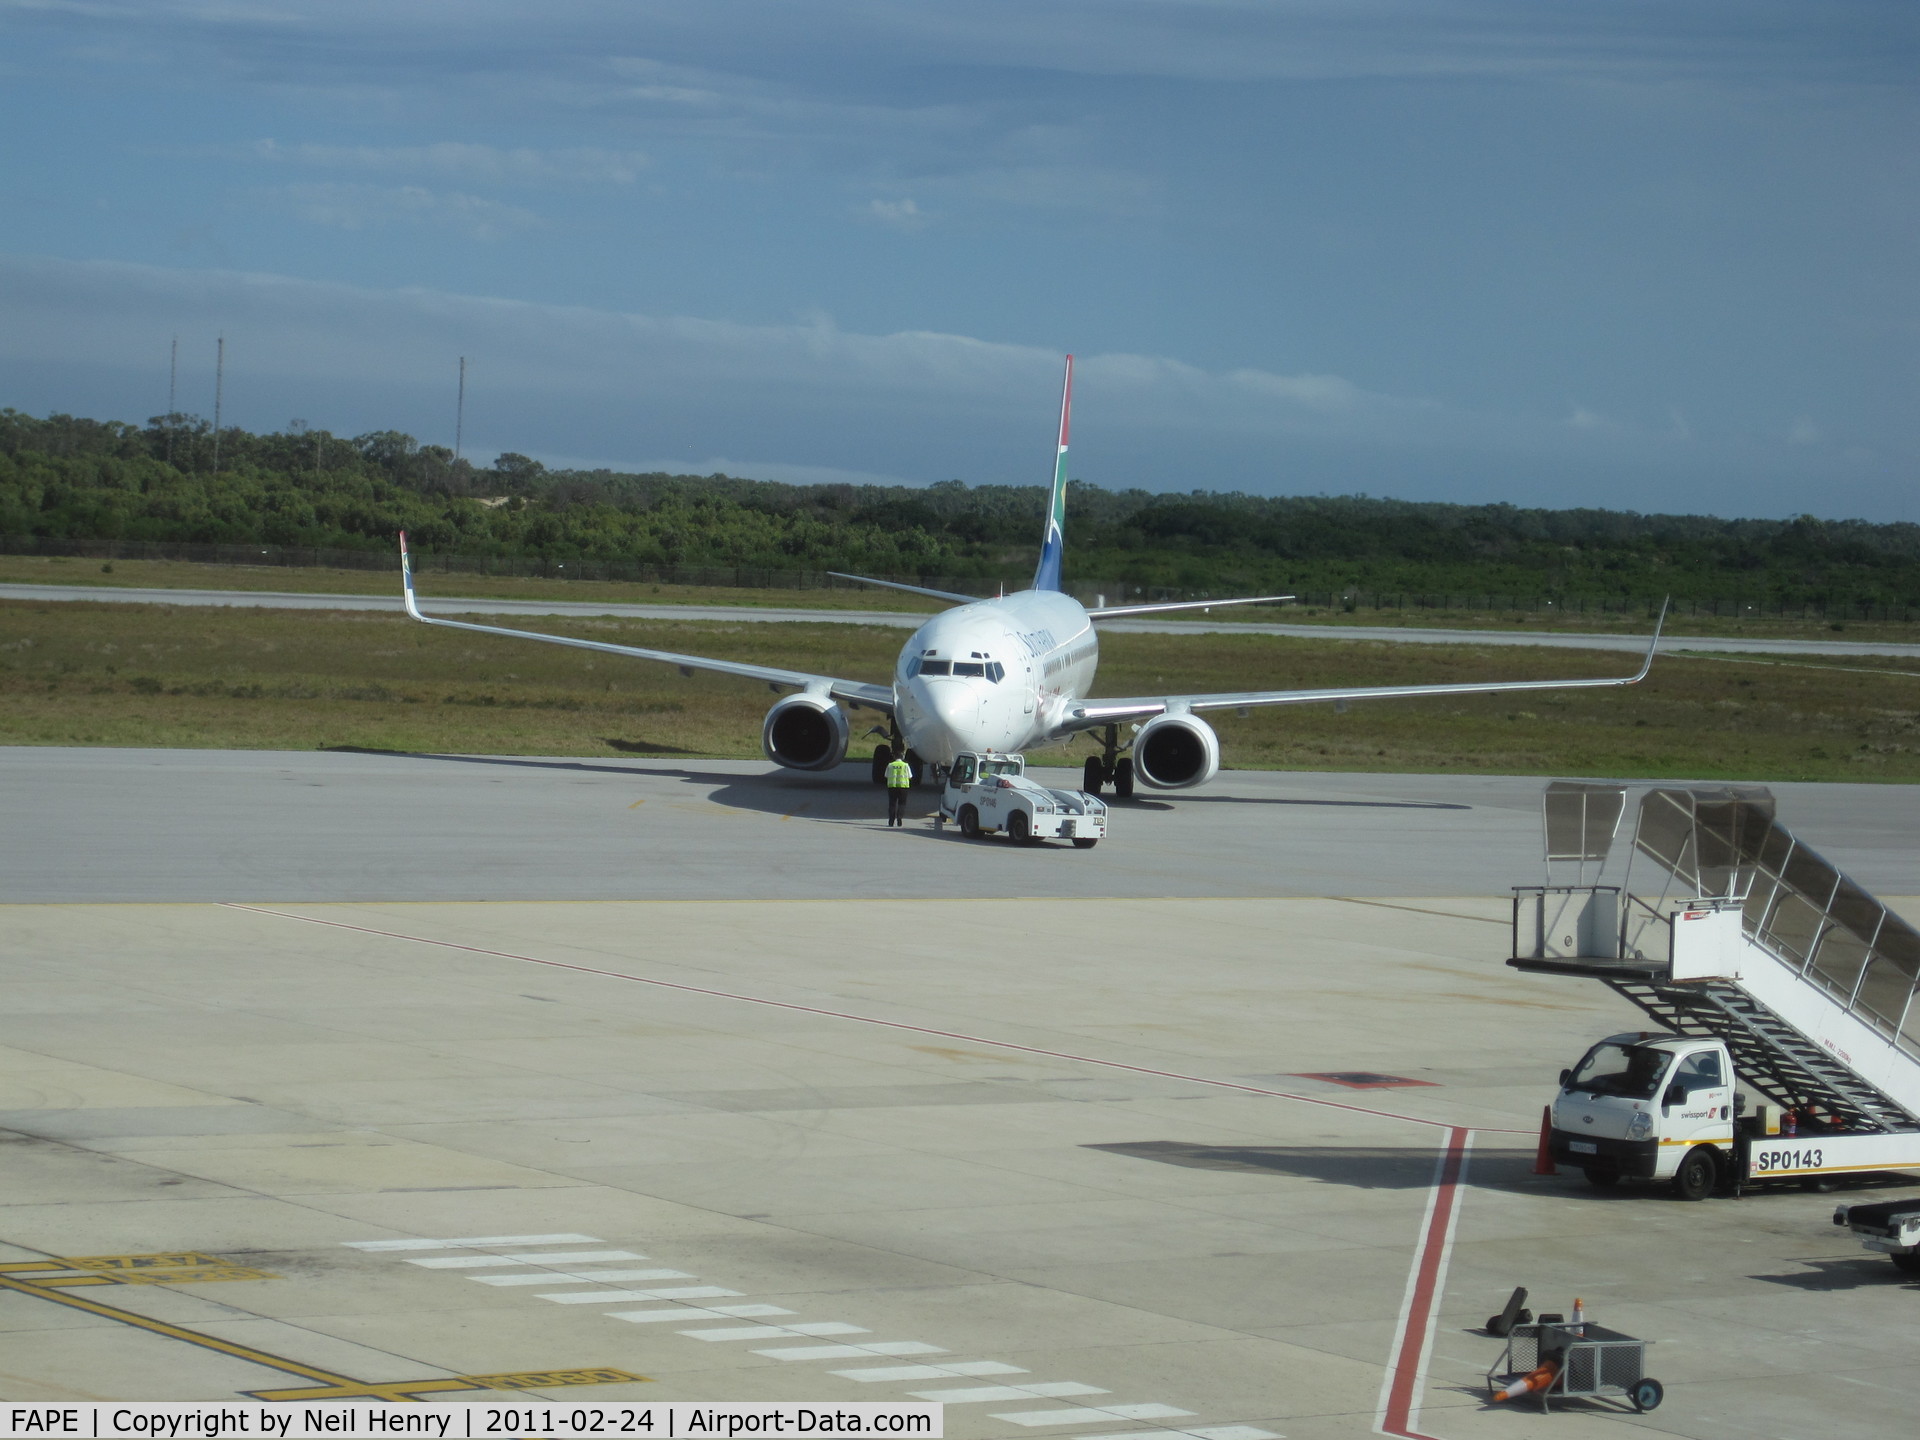 Port Elizabeth Airport, Port Elizabeth South Africa (FAPE) - South African ZS-SJD pushing back from terminal